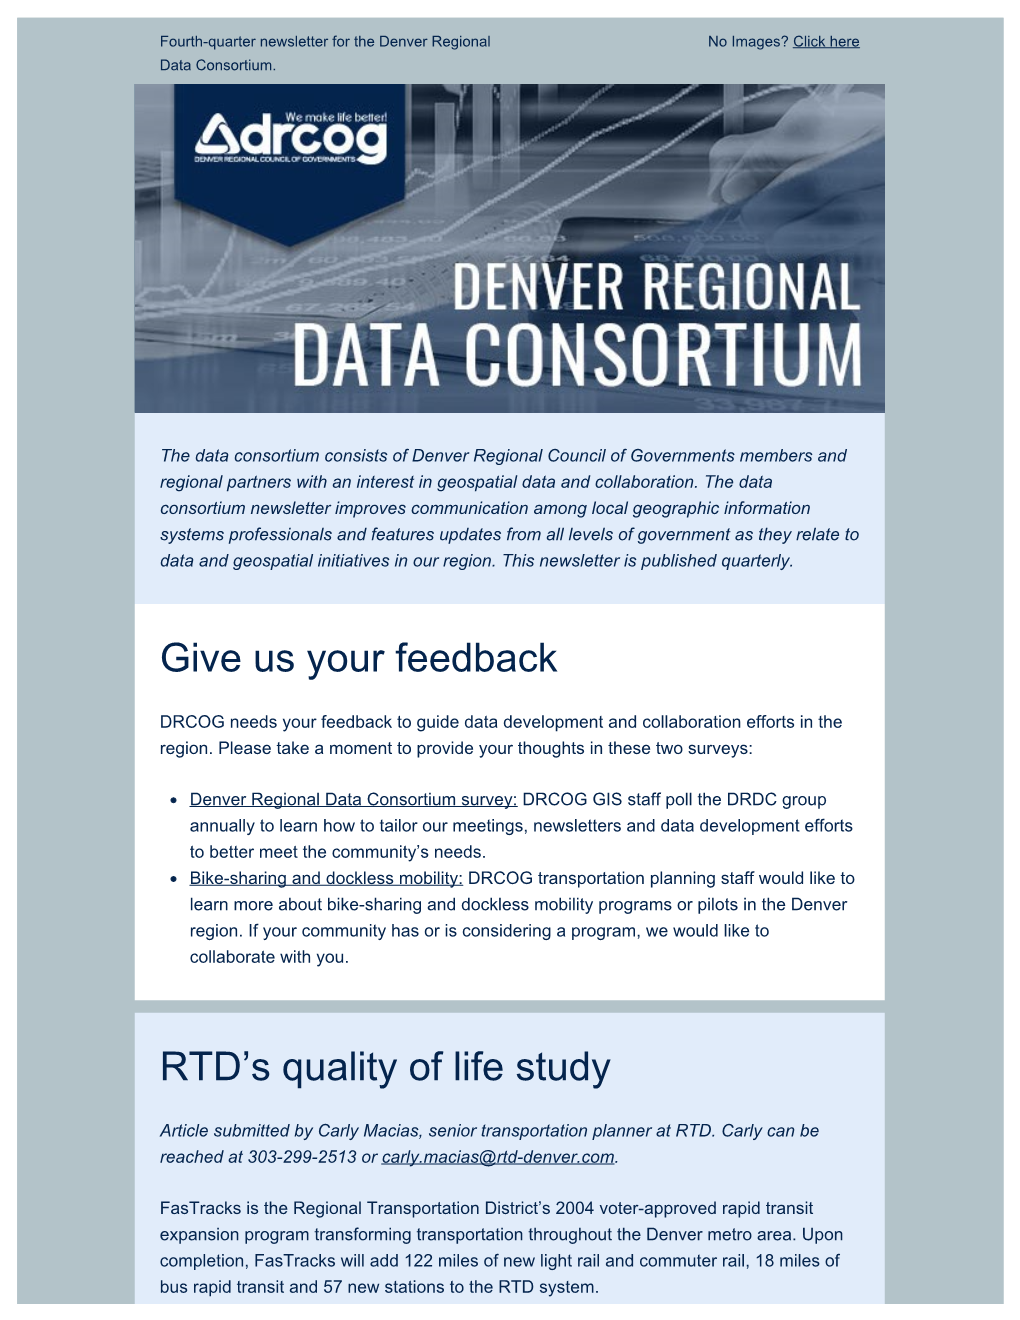 Give Us Your Feedback RTD's Quality of Life Study